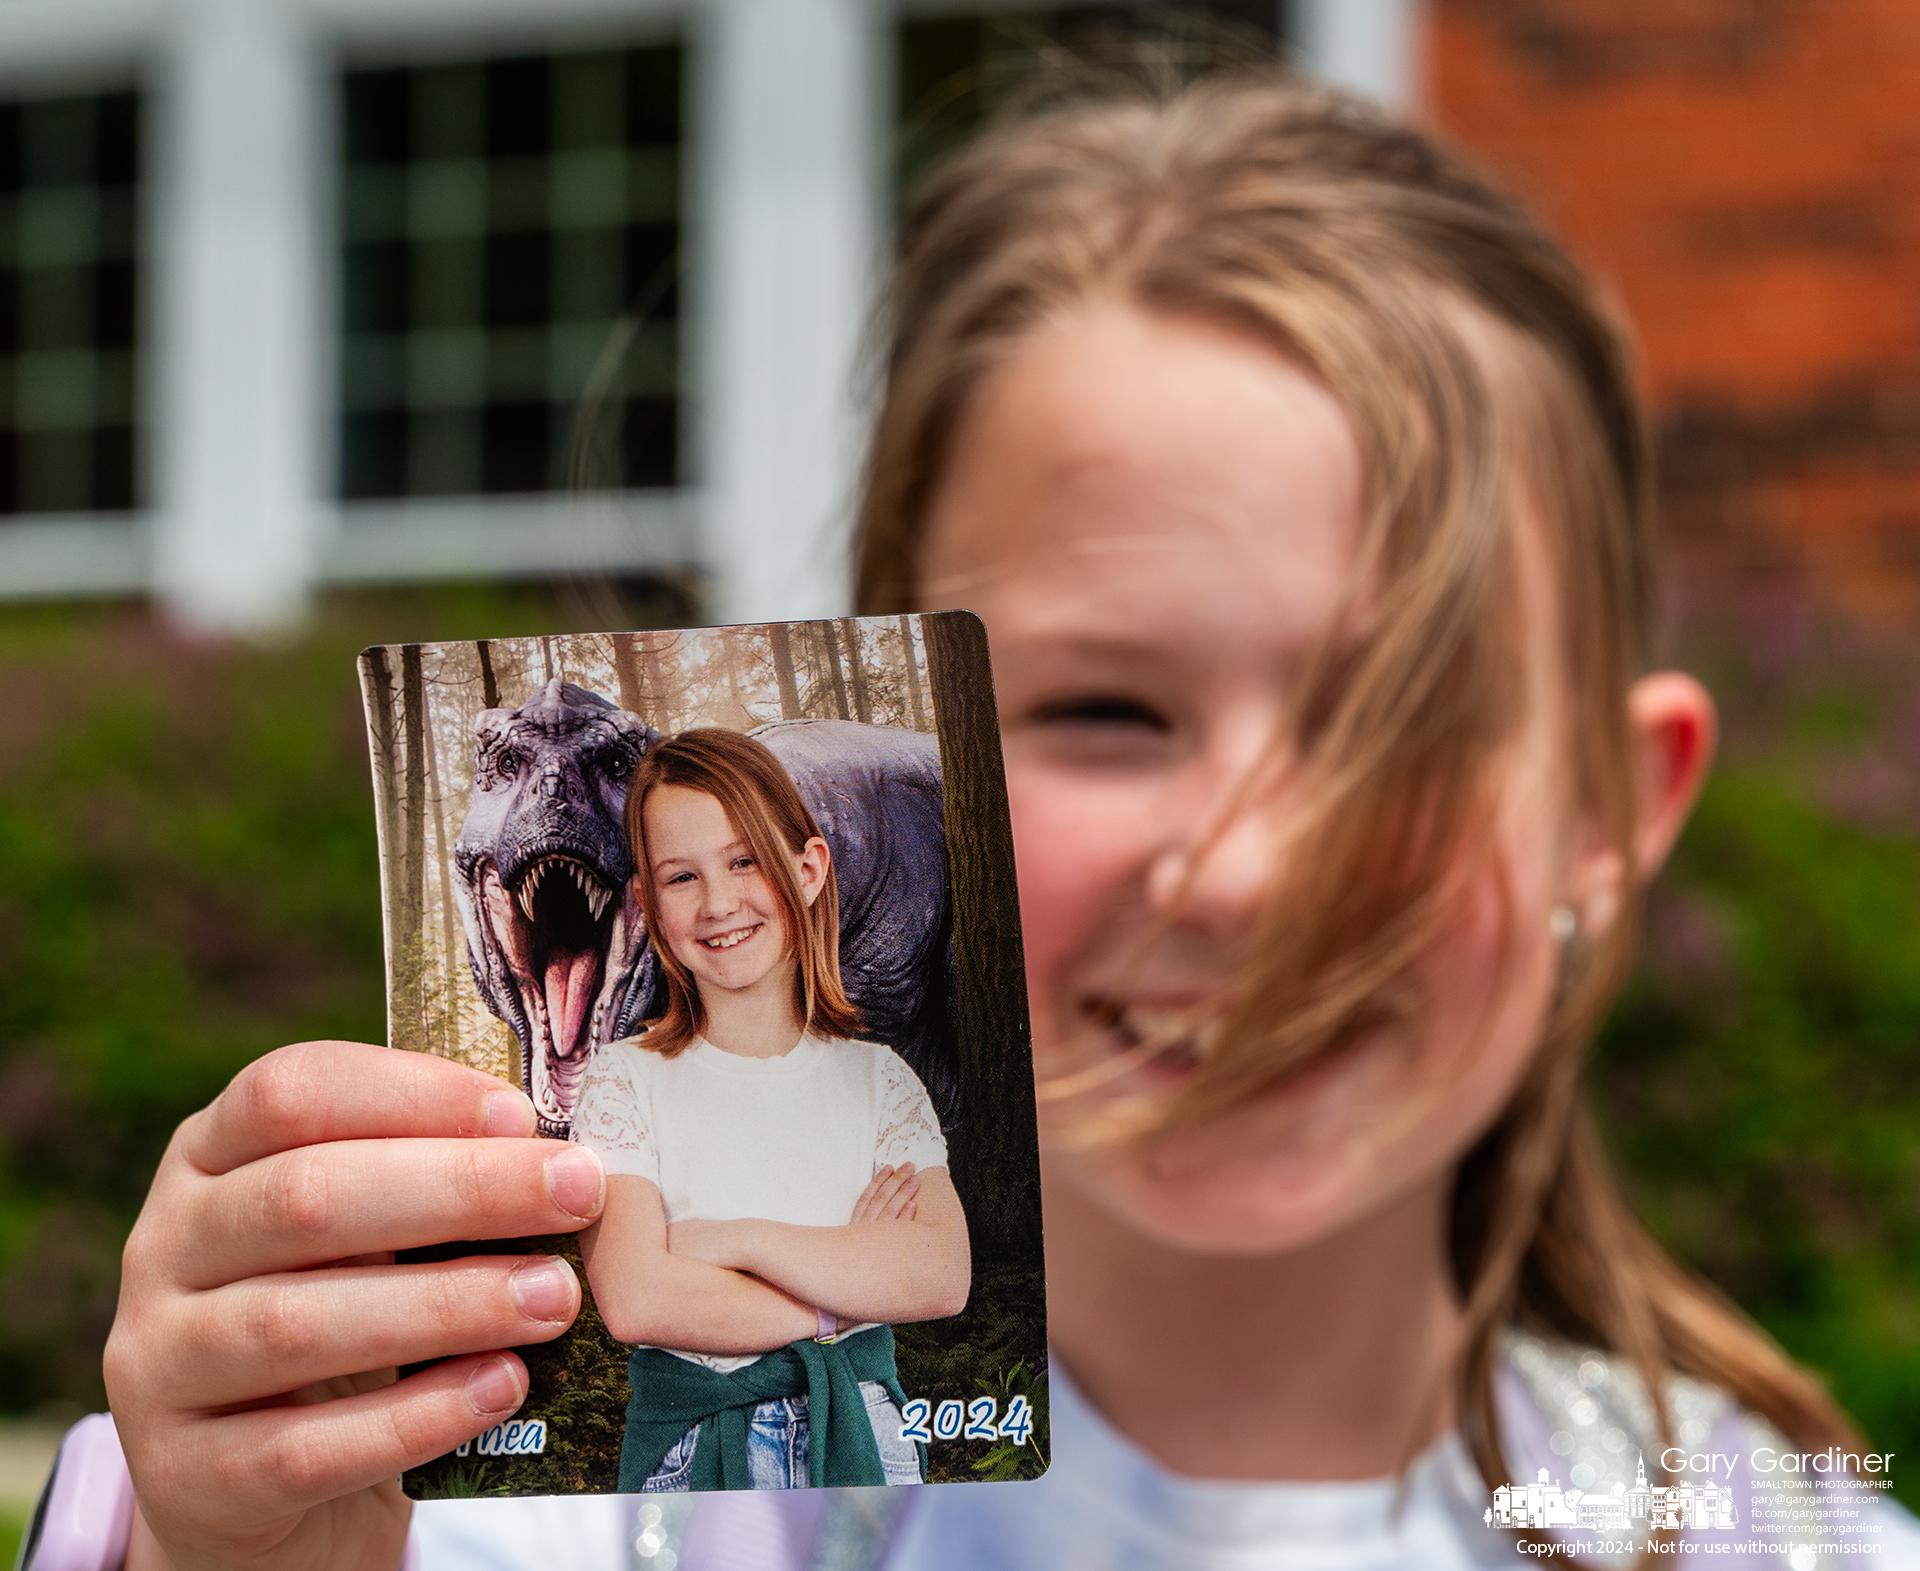 Thea Willemstein, 9, proudly shows off her Hanby Elementary third grade class portrait with a T-Rex as the background. My Final Photo for April 26, 2024.